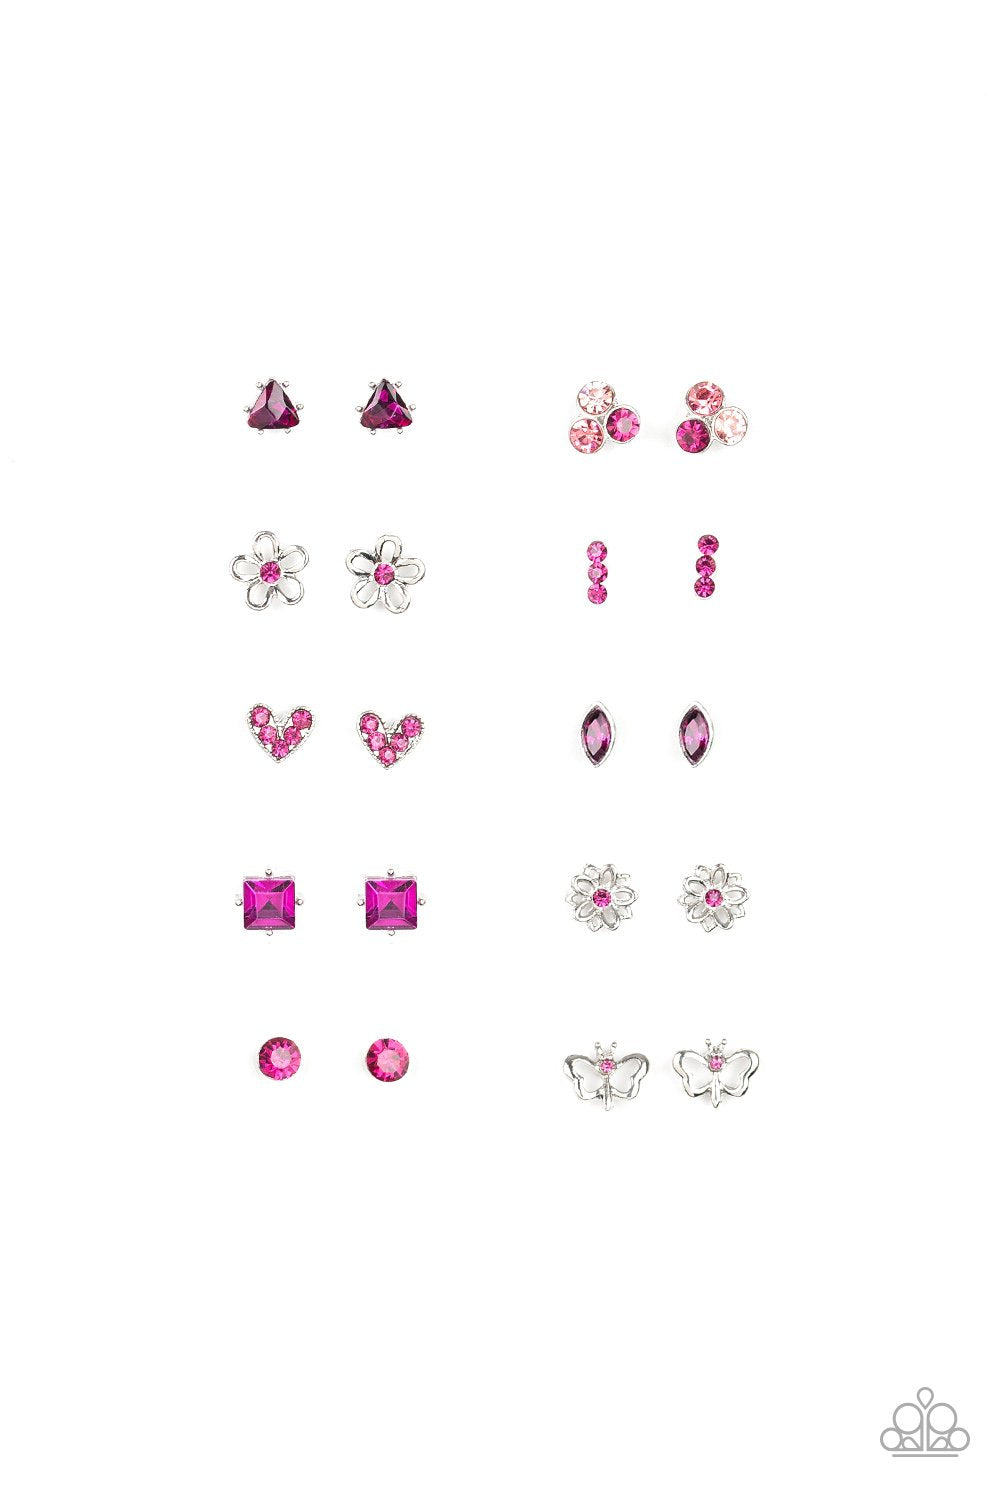 FOR THE LOVE OF PINK EARRINGS - SET OF 10 PAIRS OF EARRINGS